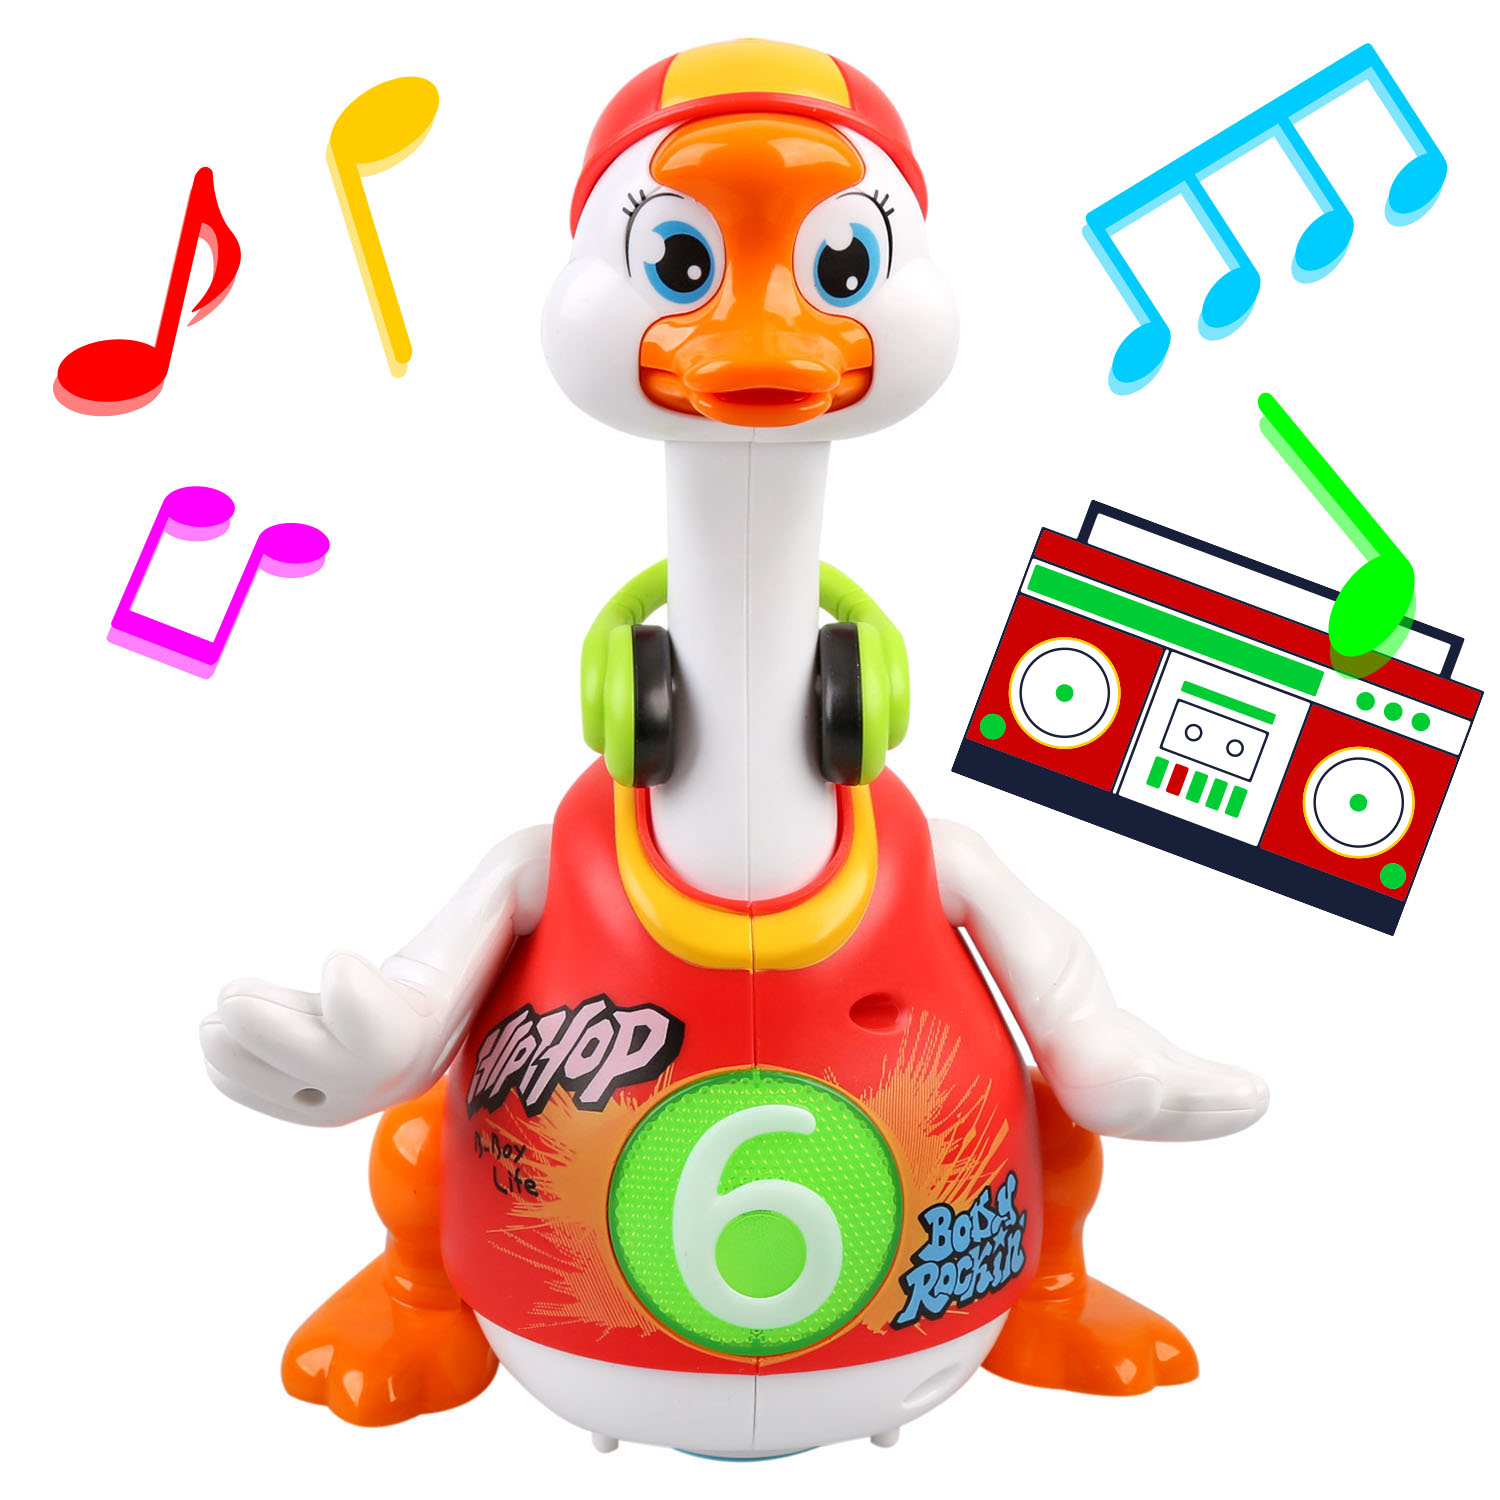 URBAN KIT Dancing Hip Hop Goose Development Musical Toy | Hip Hop Goose Toy | Toddler Dancing | Rapping Duck | Dancing Toy for Toddler | Singing Toys for Toddlers-Red - image 1 of 6